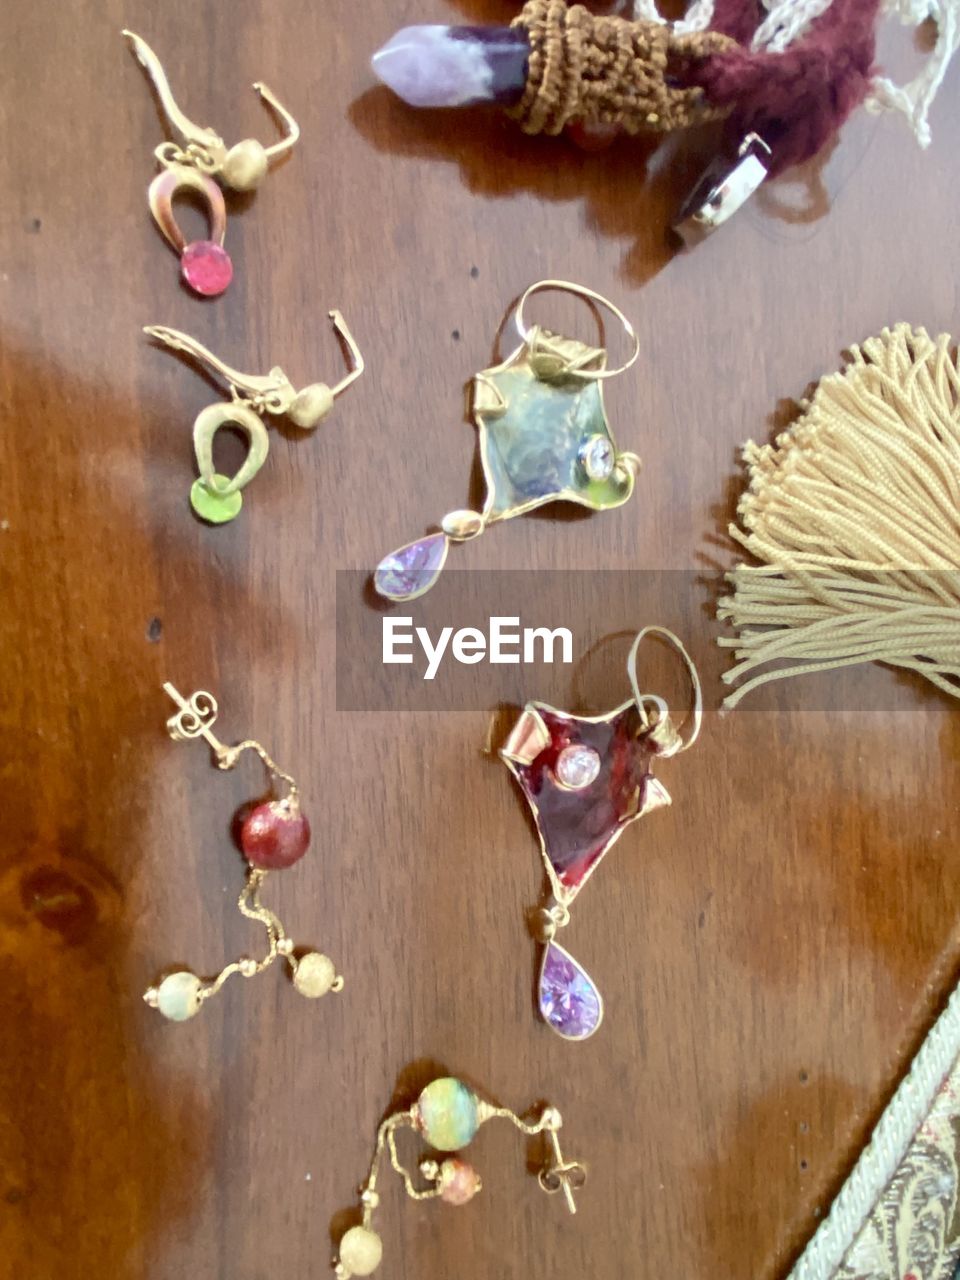 wood, indoors, food and drink, high angle view, food, table, still life, no people, necklace, jewellery, large group of objects, variation, art, freshness, nature, healthy eating, plant, flower, leaf, directly above, earring, creativity, wellbeing, fashion accessory